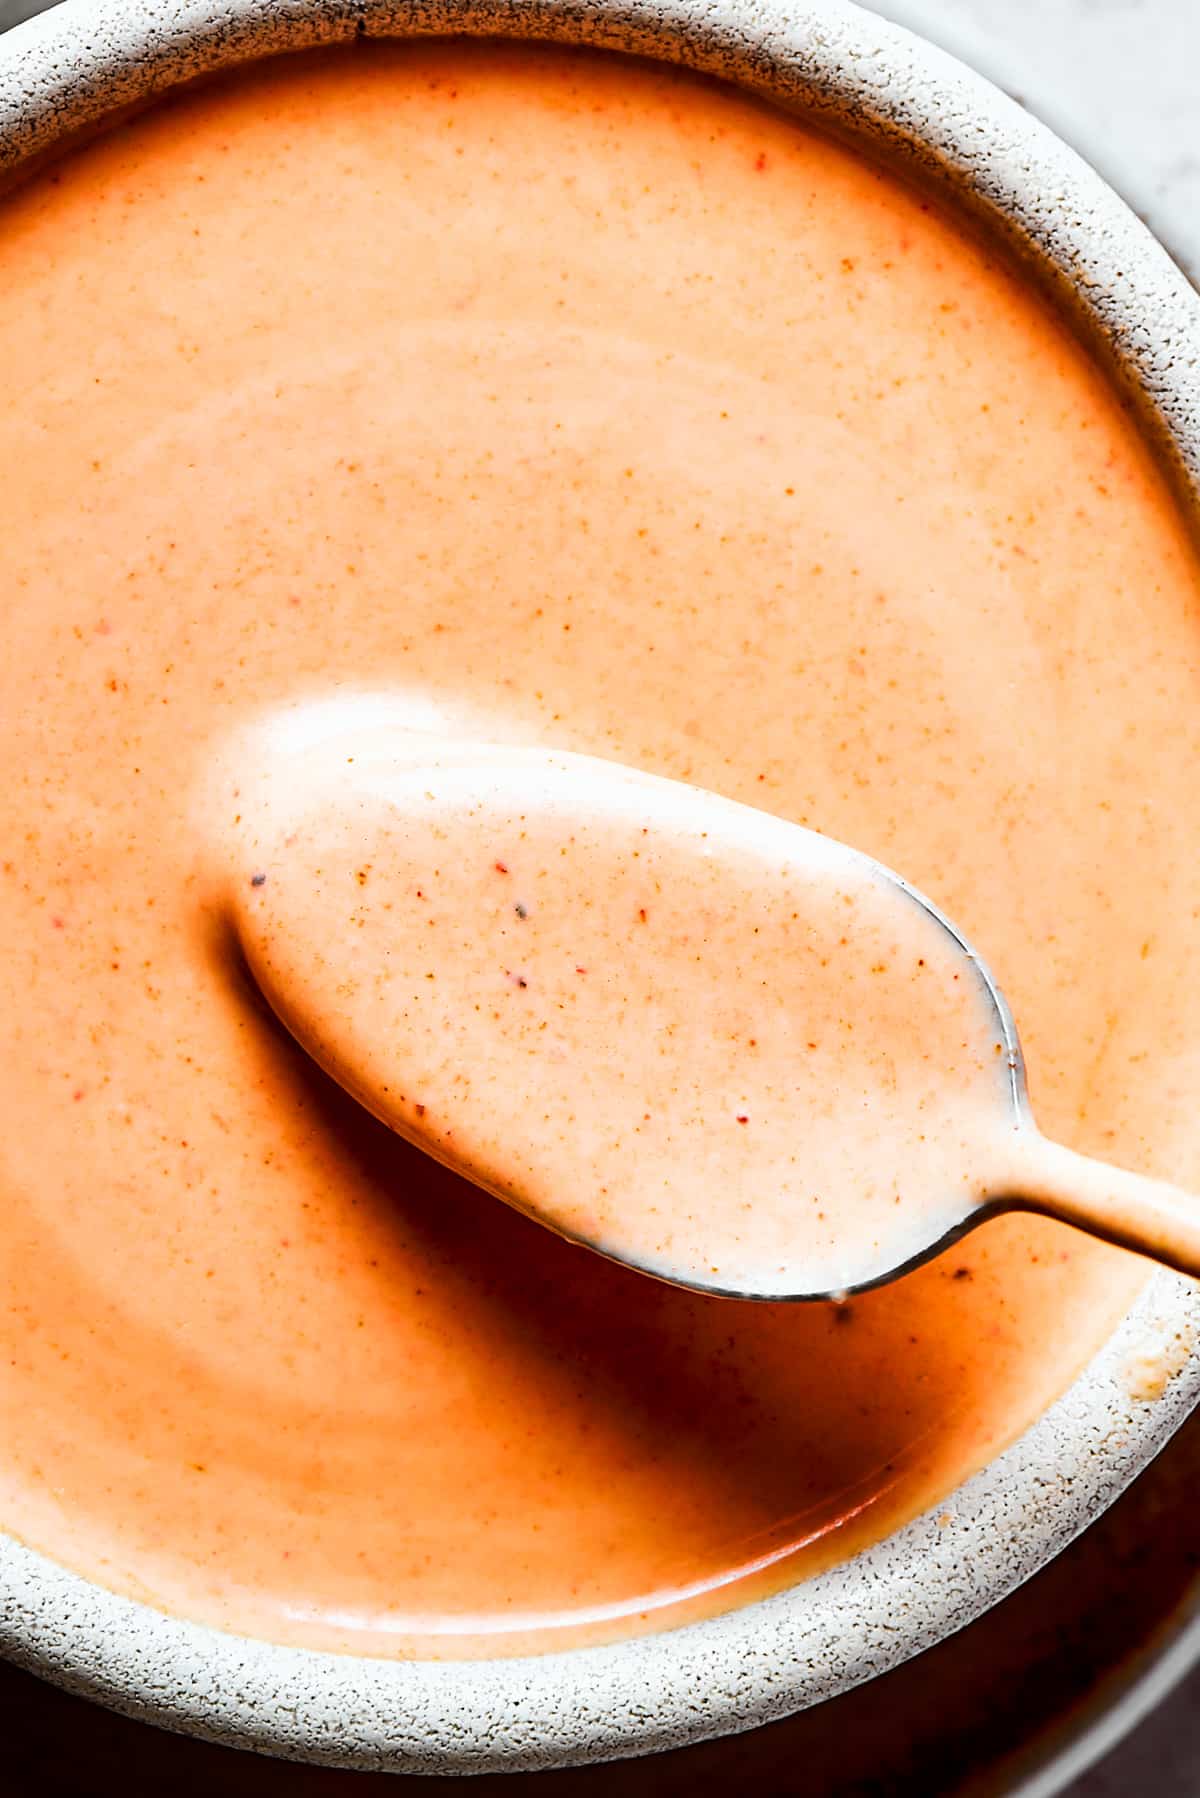 A close-up photo of Homemade yum yum sauce in a bowl.